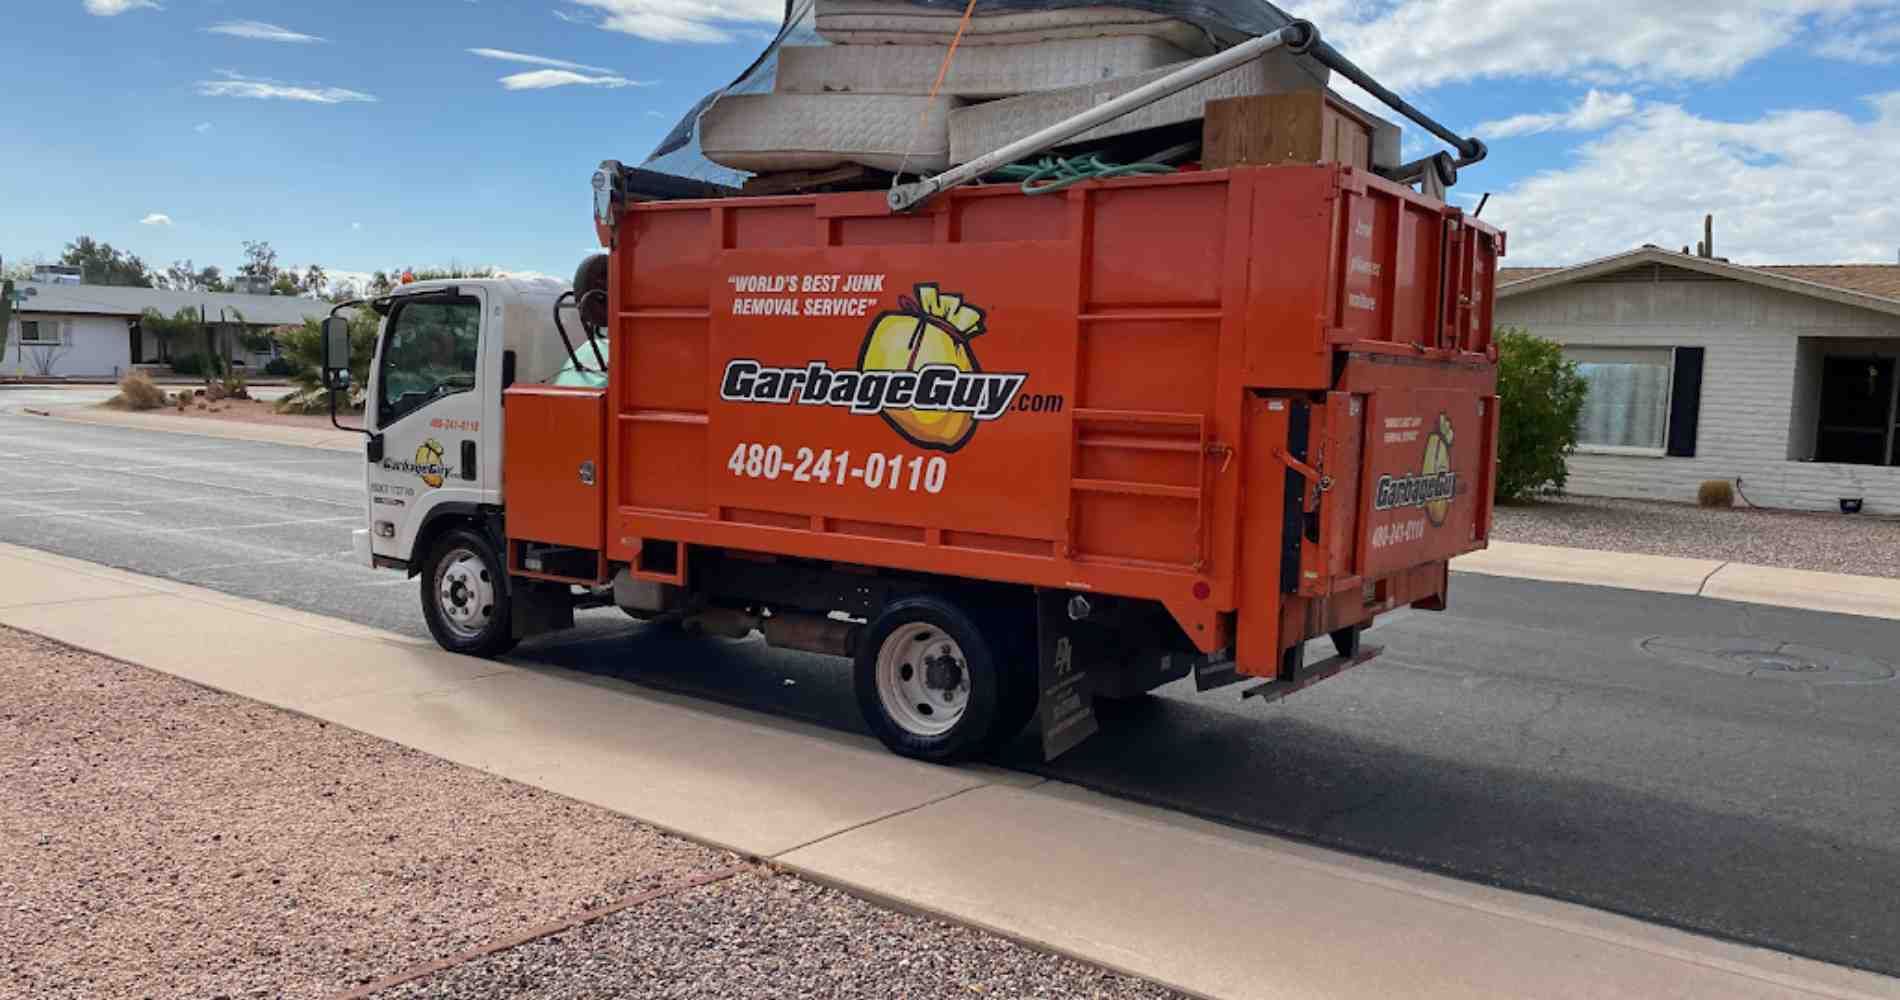 #1 for Curbside Trash Pickup in Mesa, AZ with Over 1200 5-Star Reviews!